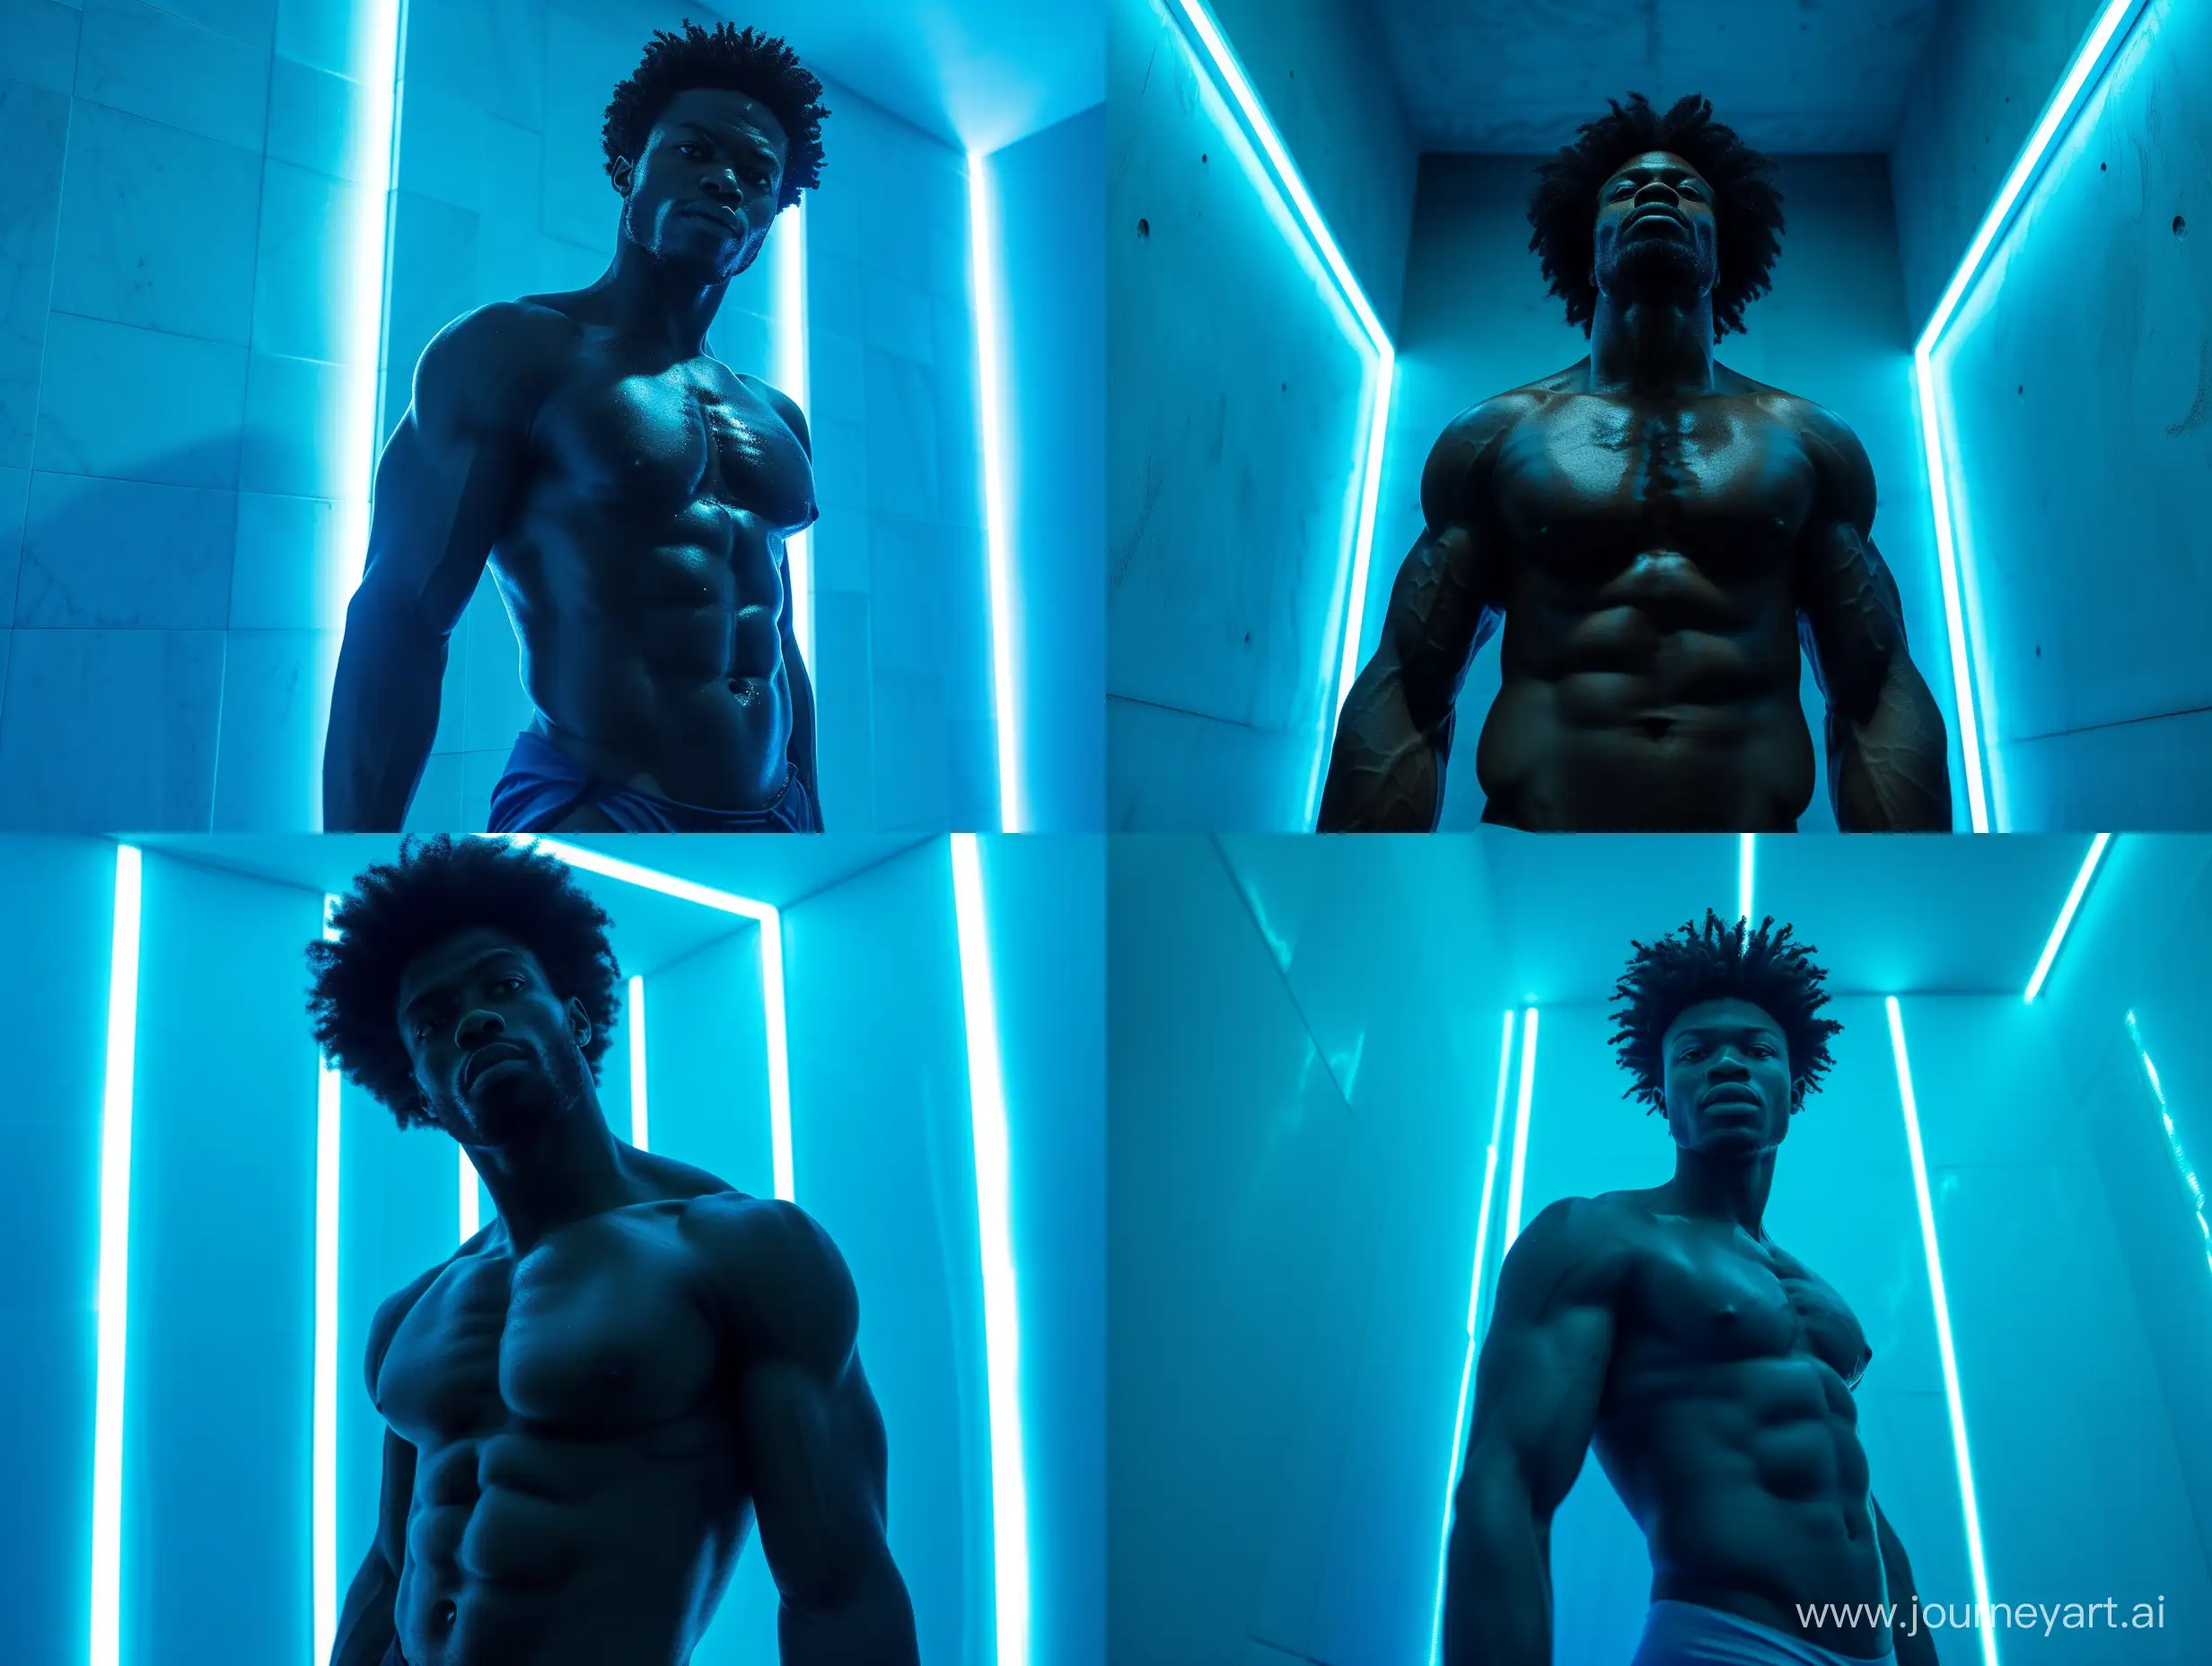 A handsome black afro man, exuding confidence and strength, stands in his room illuminated by a vibrant blue LED strip. The room is minimalist, with clean lines and a sleek design. The blue light creates a futuristic and captivating atmosphere. The man's sculpted abs glisten under the soft glow, emphasizing his physical fitness and allure. The camera captures his chiseled features and magnetic presence. The shot is composed with dynamic angles, adding a sense of energy and movement. The camera used is a mirrorless camera with a wide-angle lens, set to a low ISO and a fast shutter speed to capture the details of his physique.